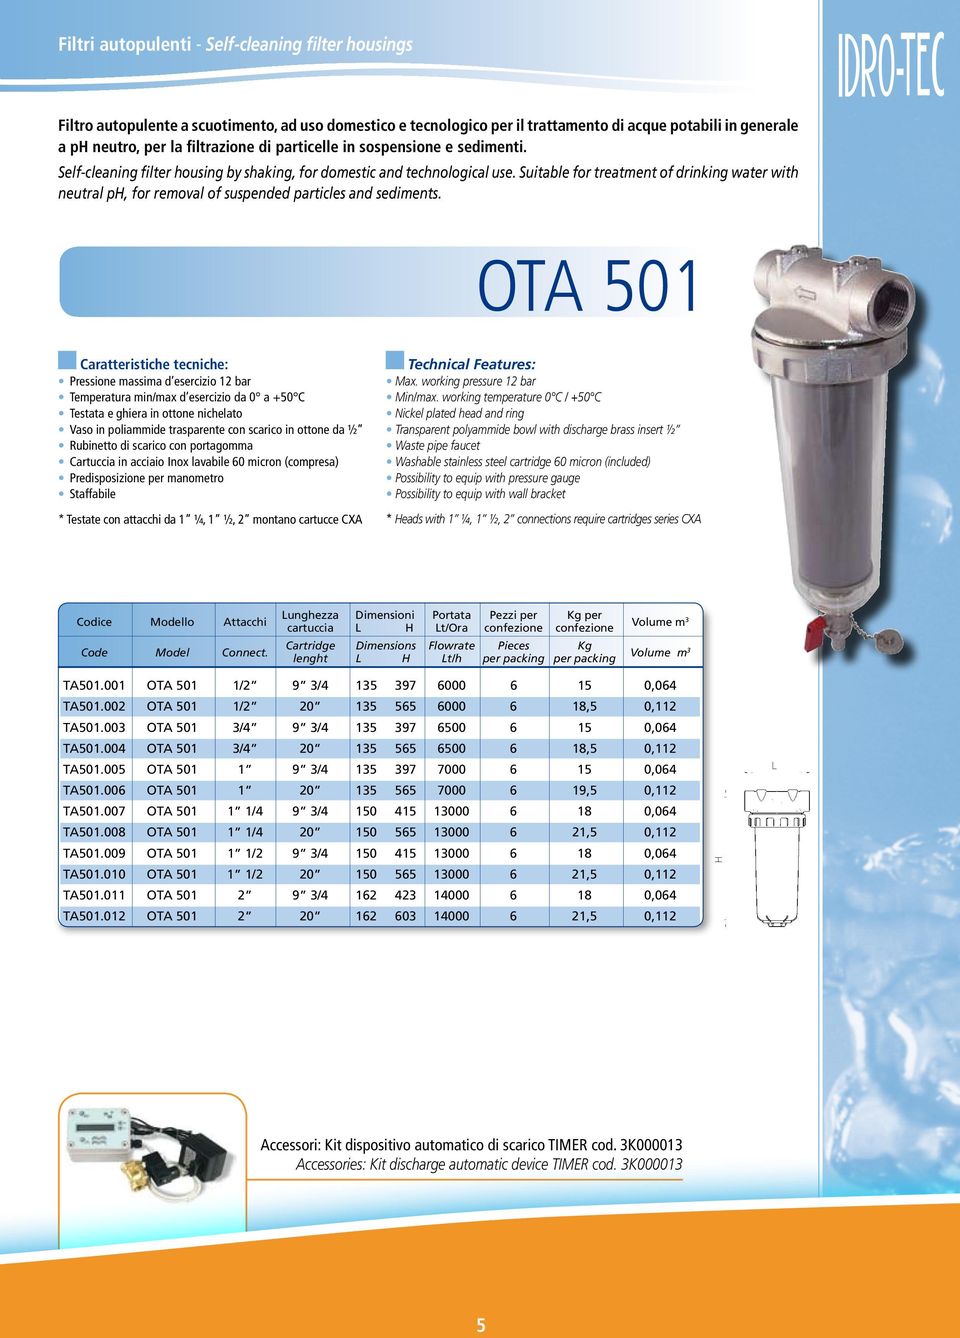 Suitable for treatment of drinking water with neutral ph, for removal of suspended particles and sediments.